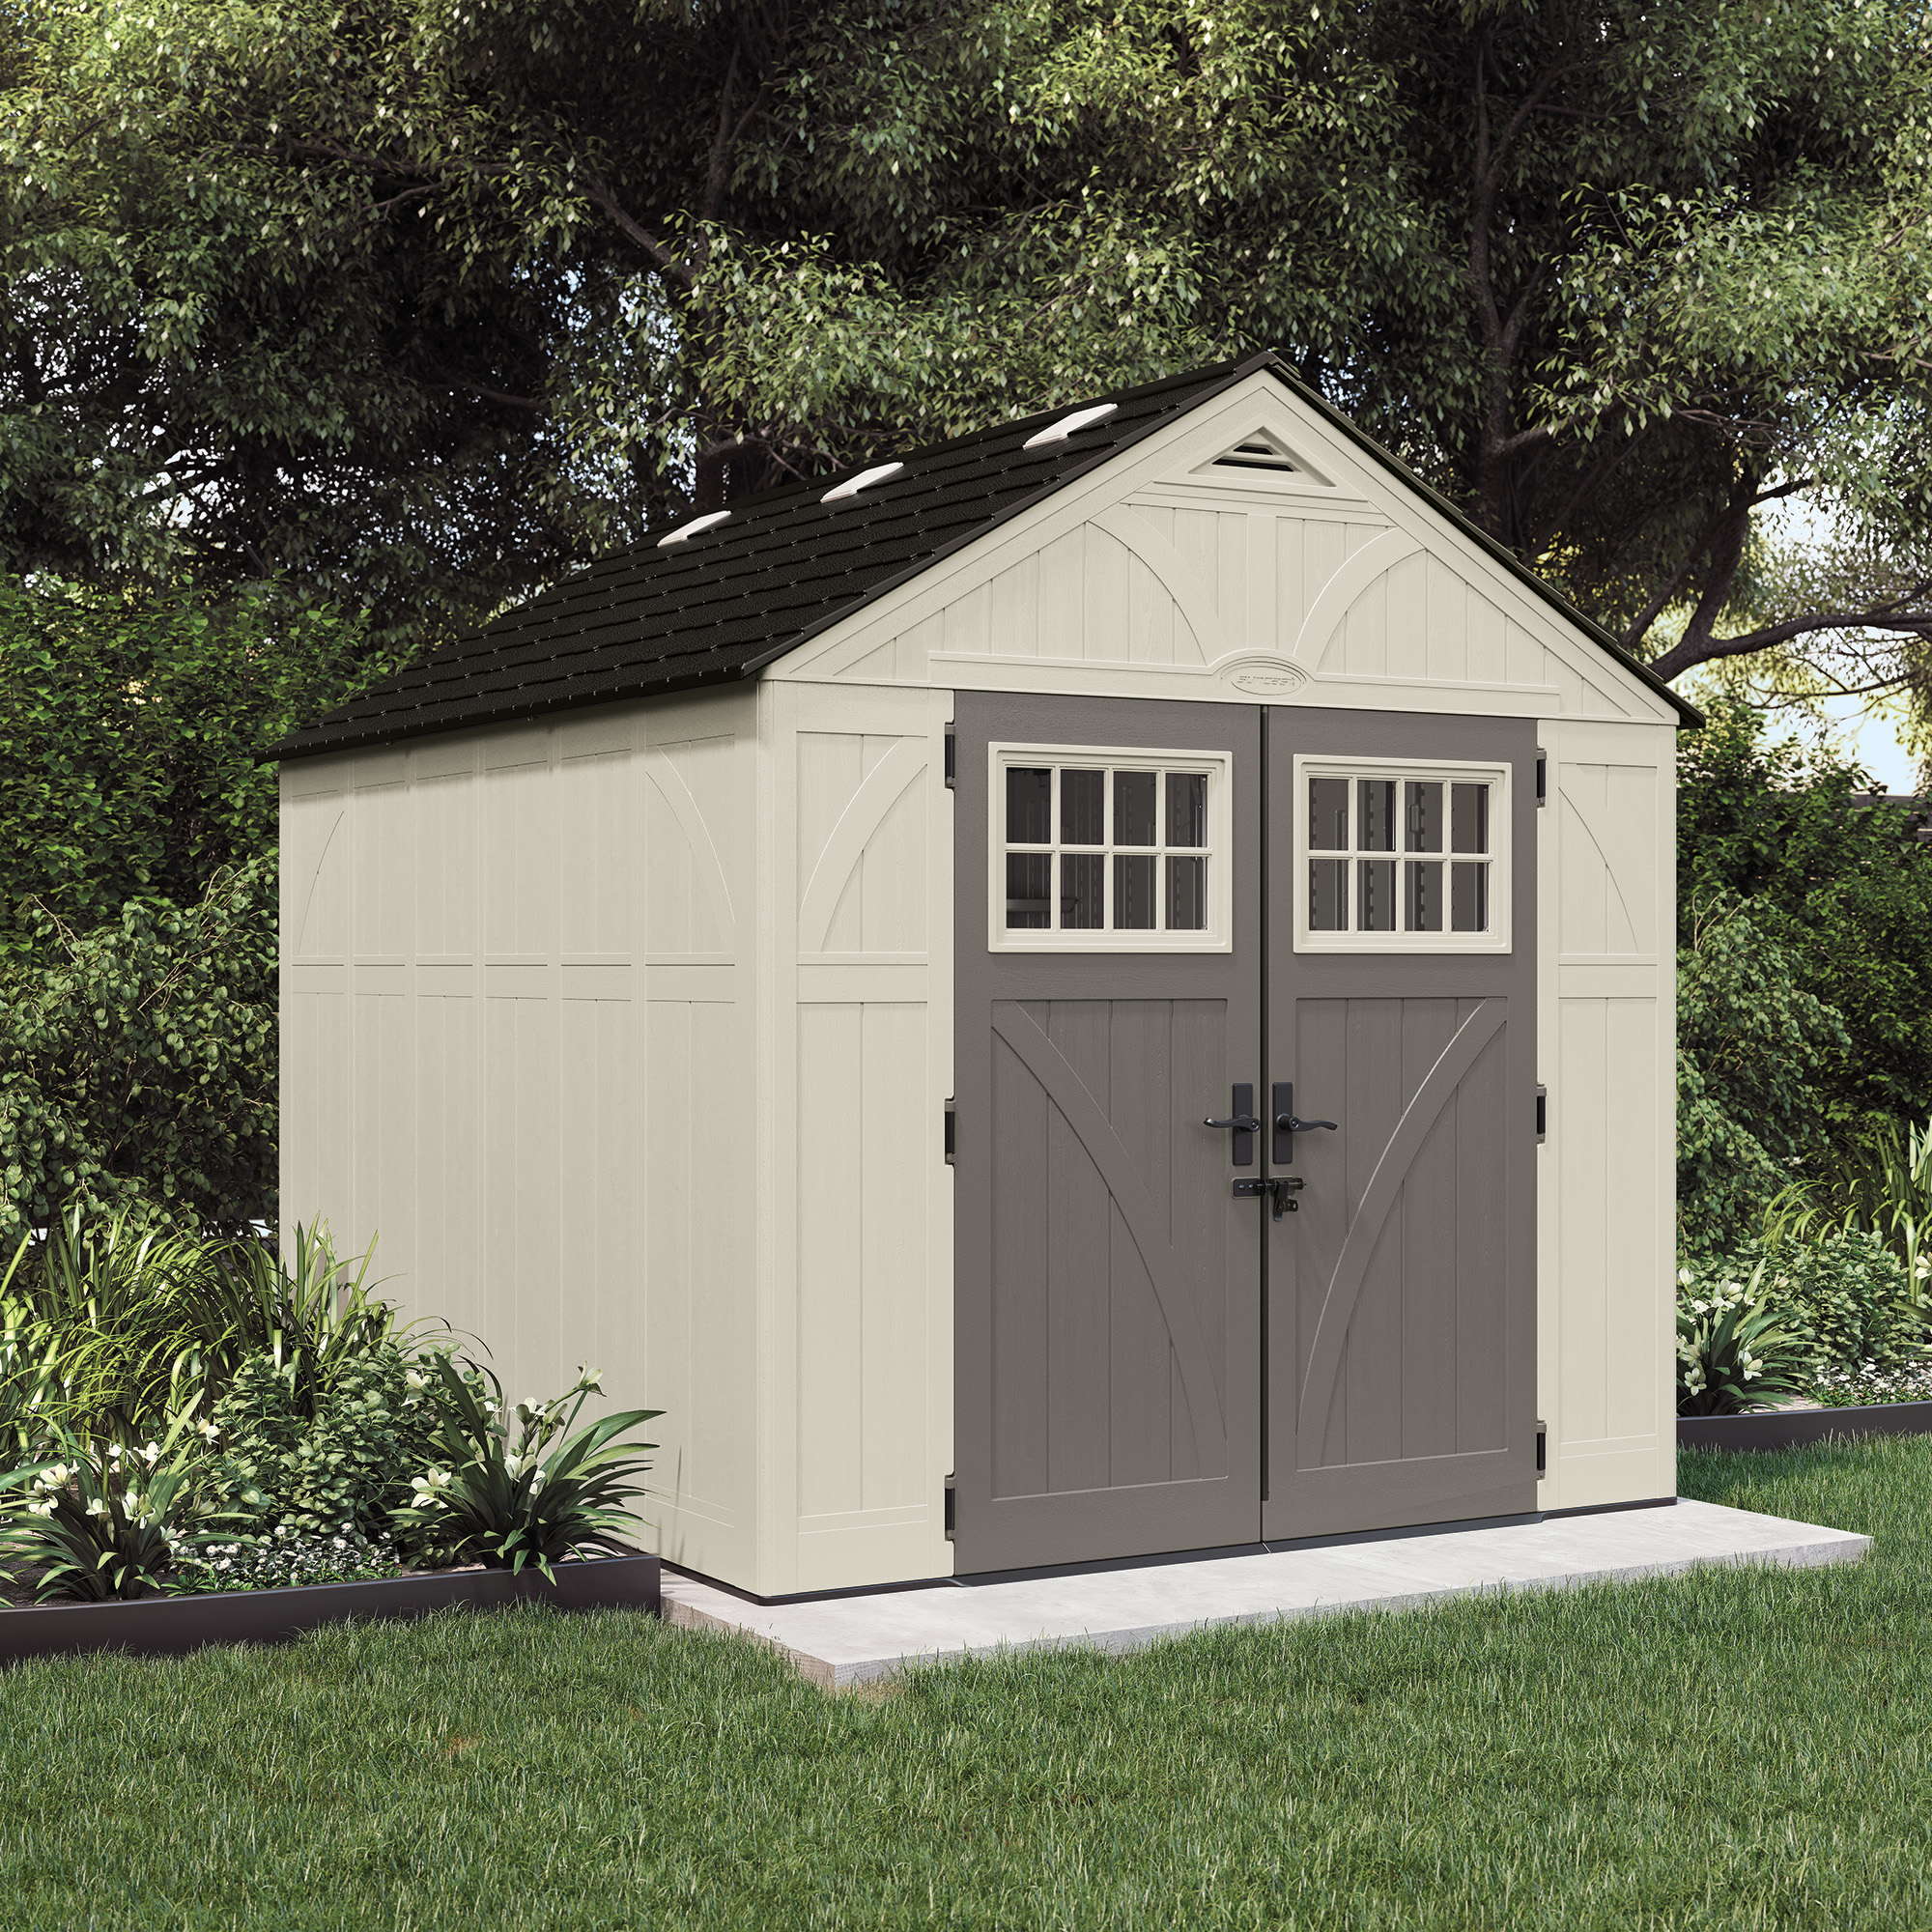 Suncast Metal and Resin Storage Shed, Vanilla, 8ft x 10ft - image 3 of 14